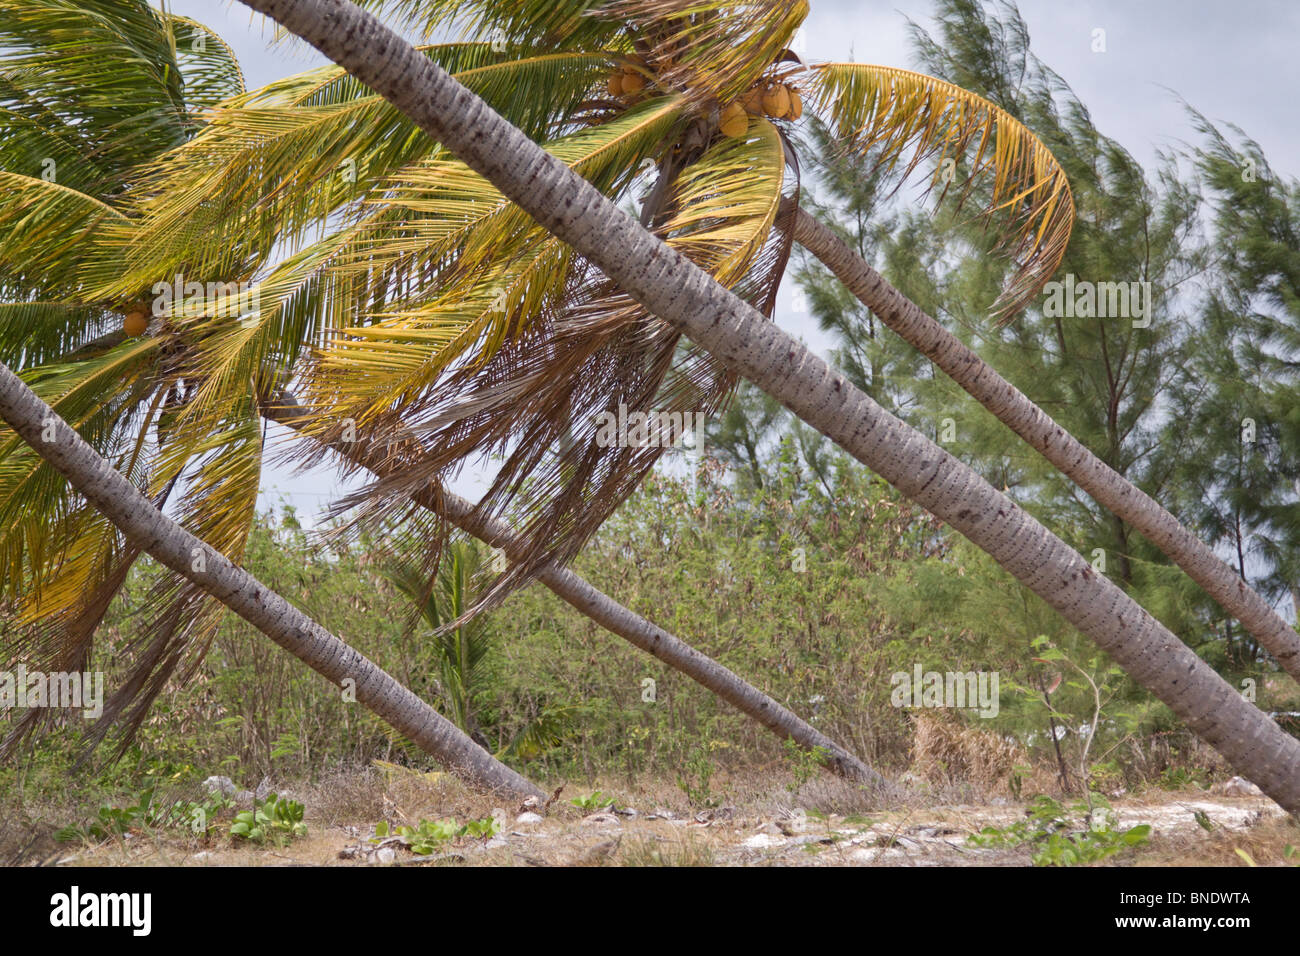 Coconut palms growing on an 45 degree angle, damaged by hurricane winds, Grand Caymens, Caribbean Sea. Stock Photo